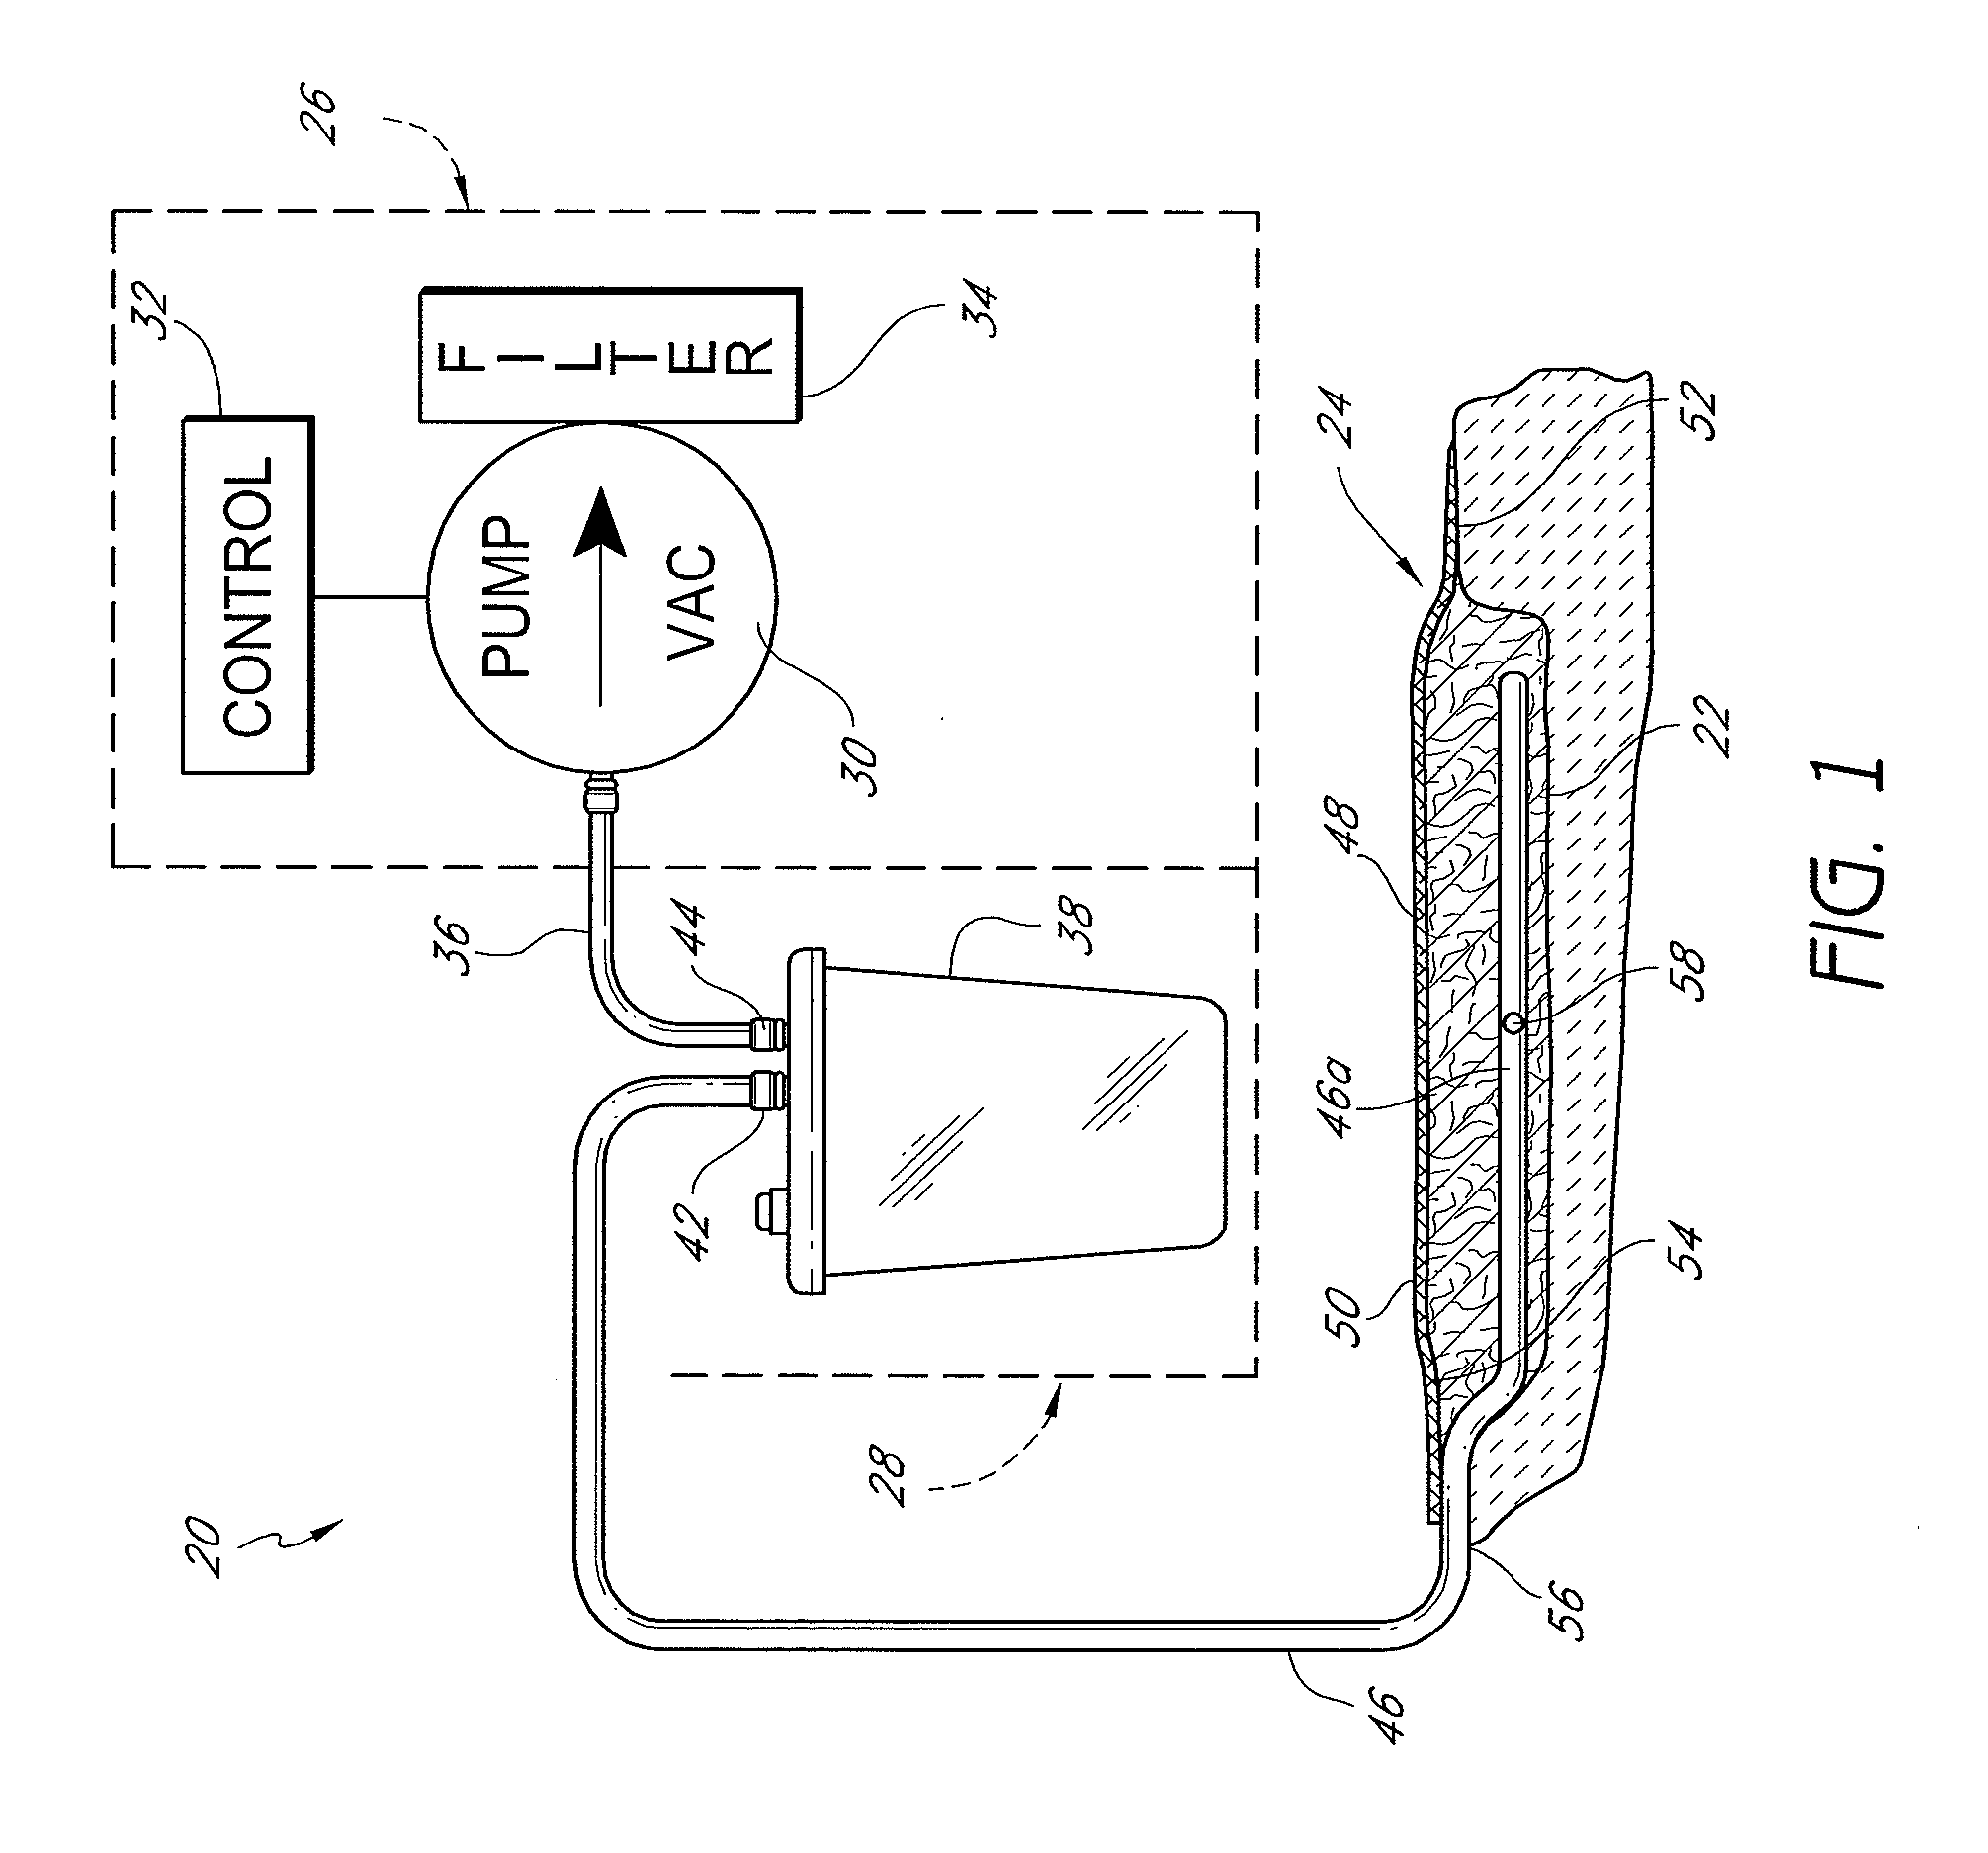 Auxiliary powered negative pressure wound therapy apparatuses and methods